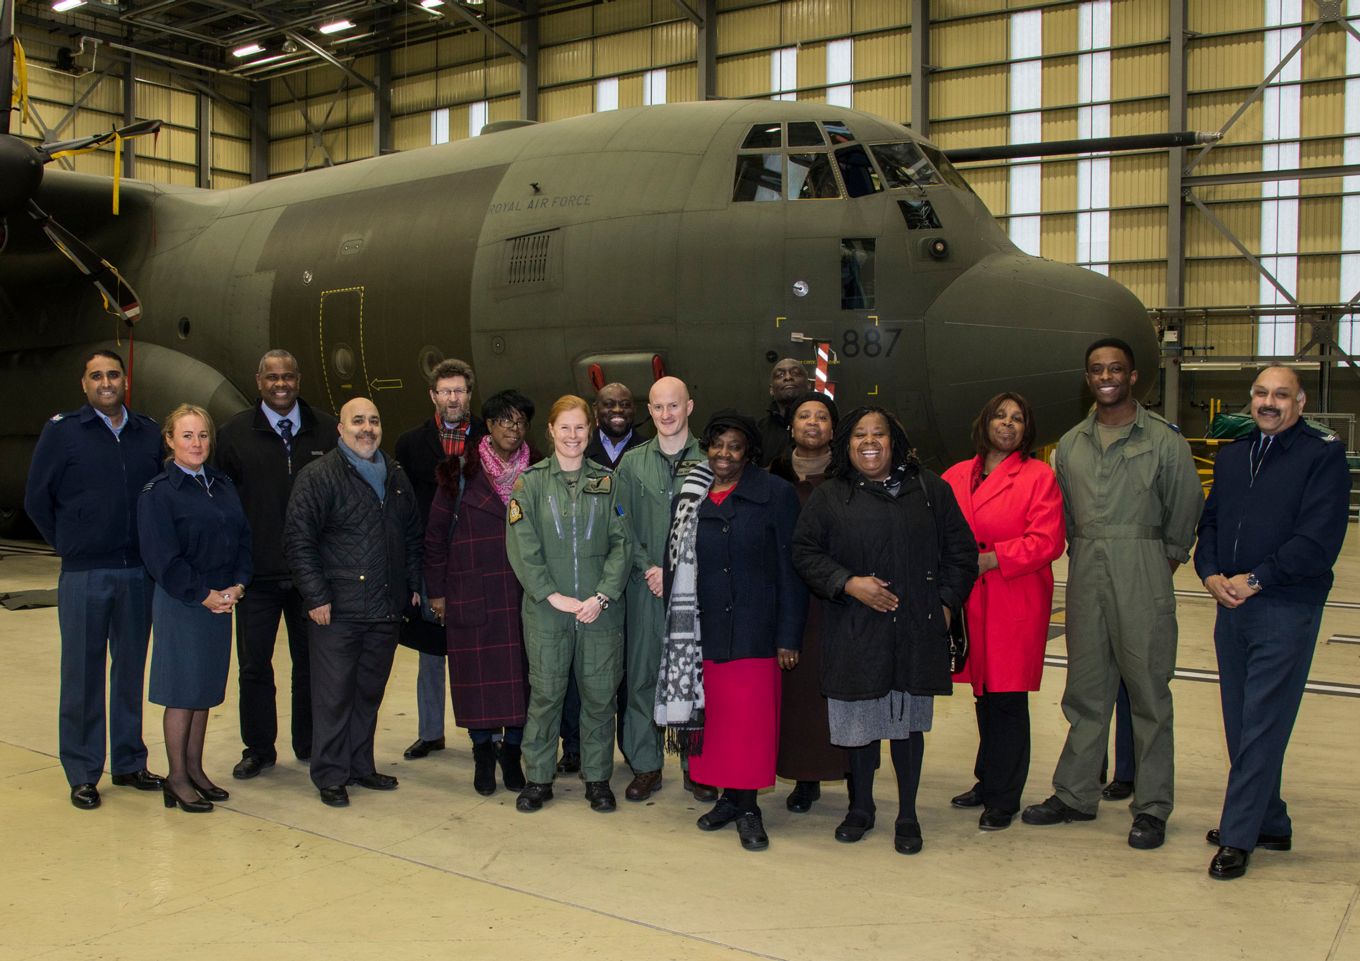 A group of Afro Caribbean Community Leaders, from Birmingham, visited RAF Brize Norton to gain an understanding of what the Royal Air Force can offer young people